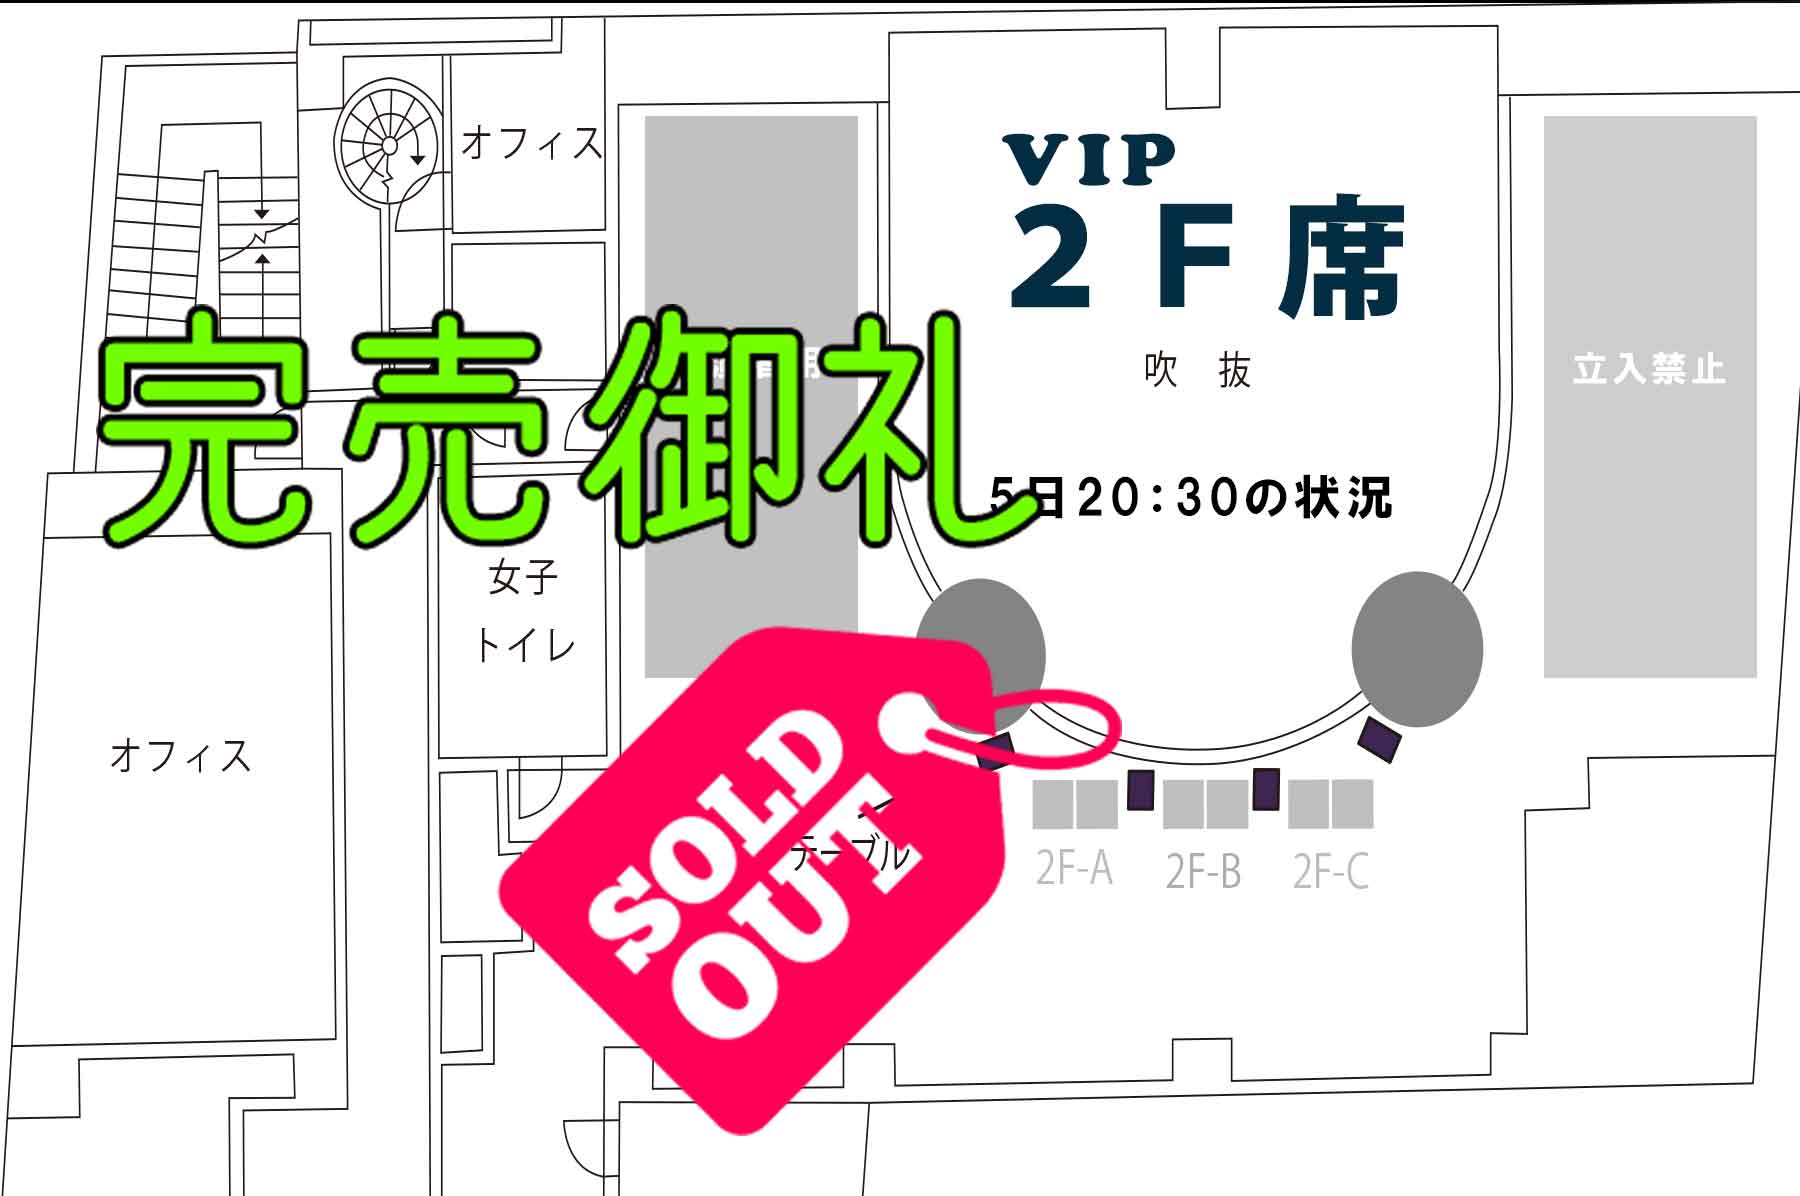 sold out for 2nd floor ticket 7thevet